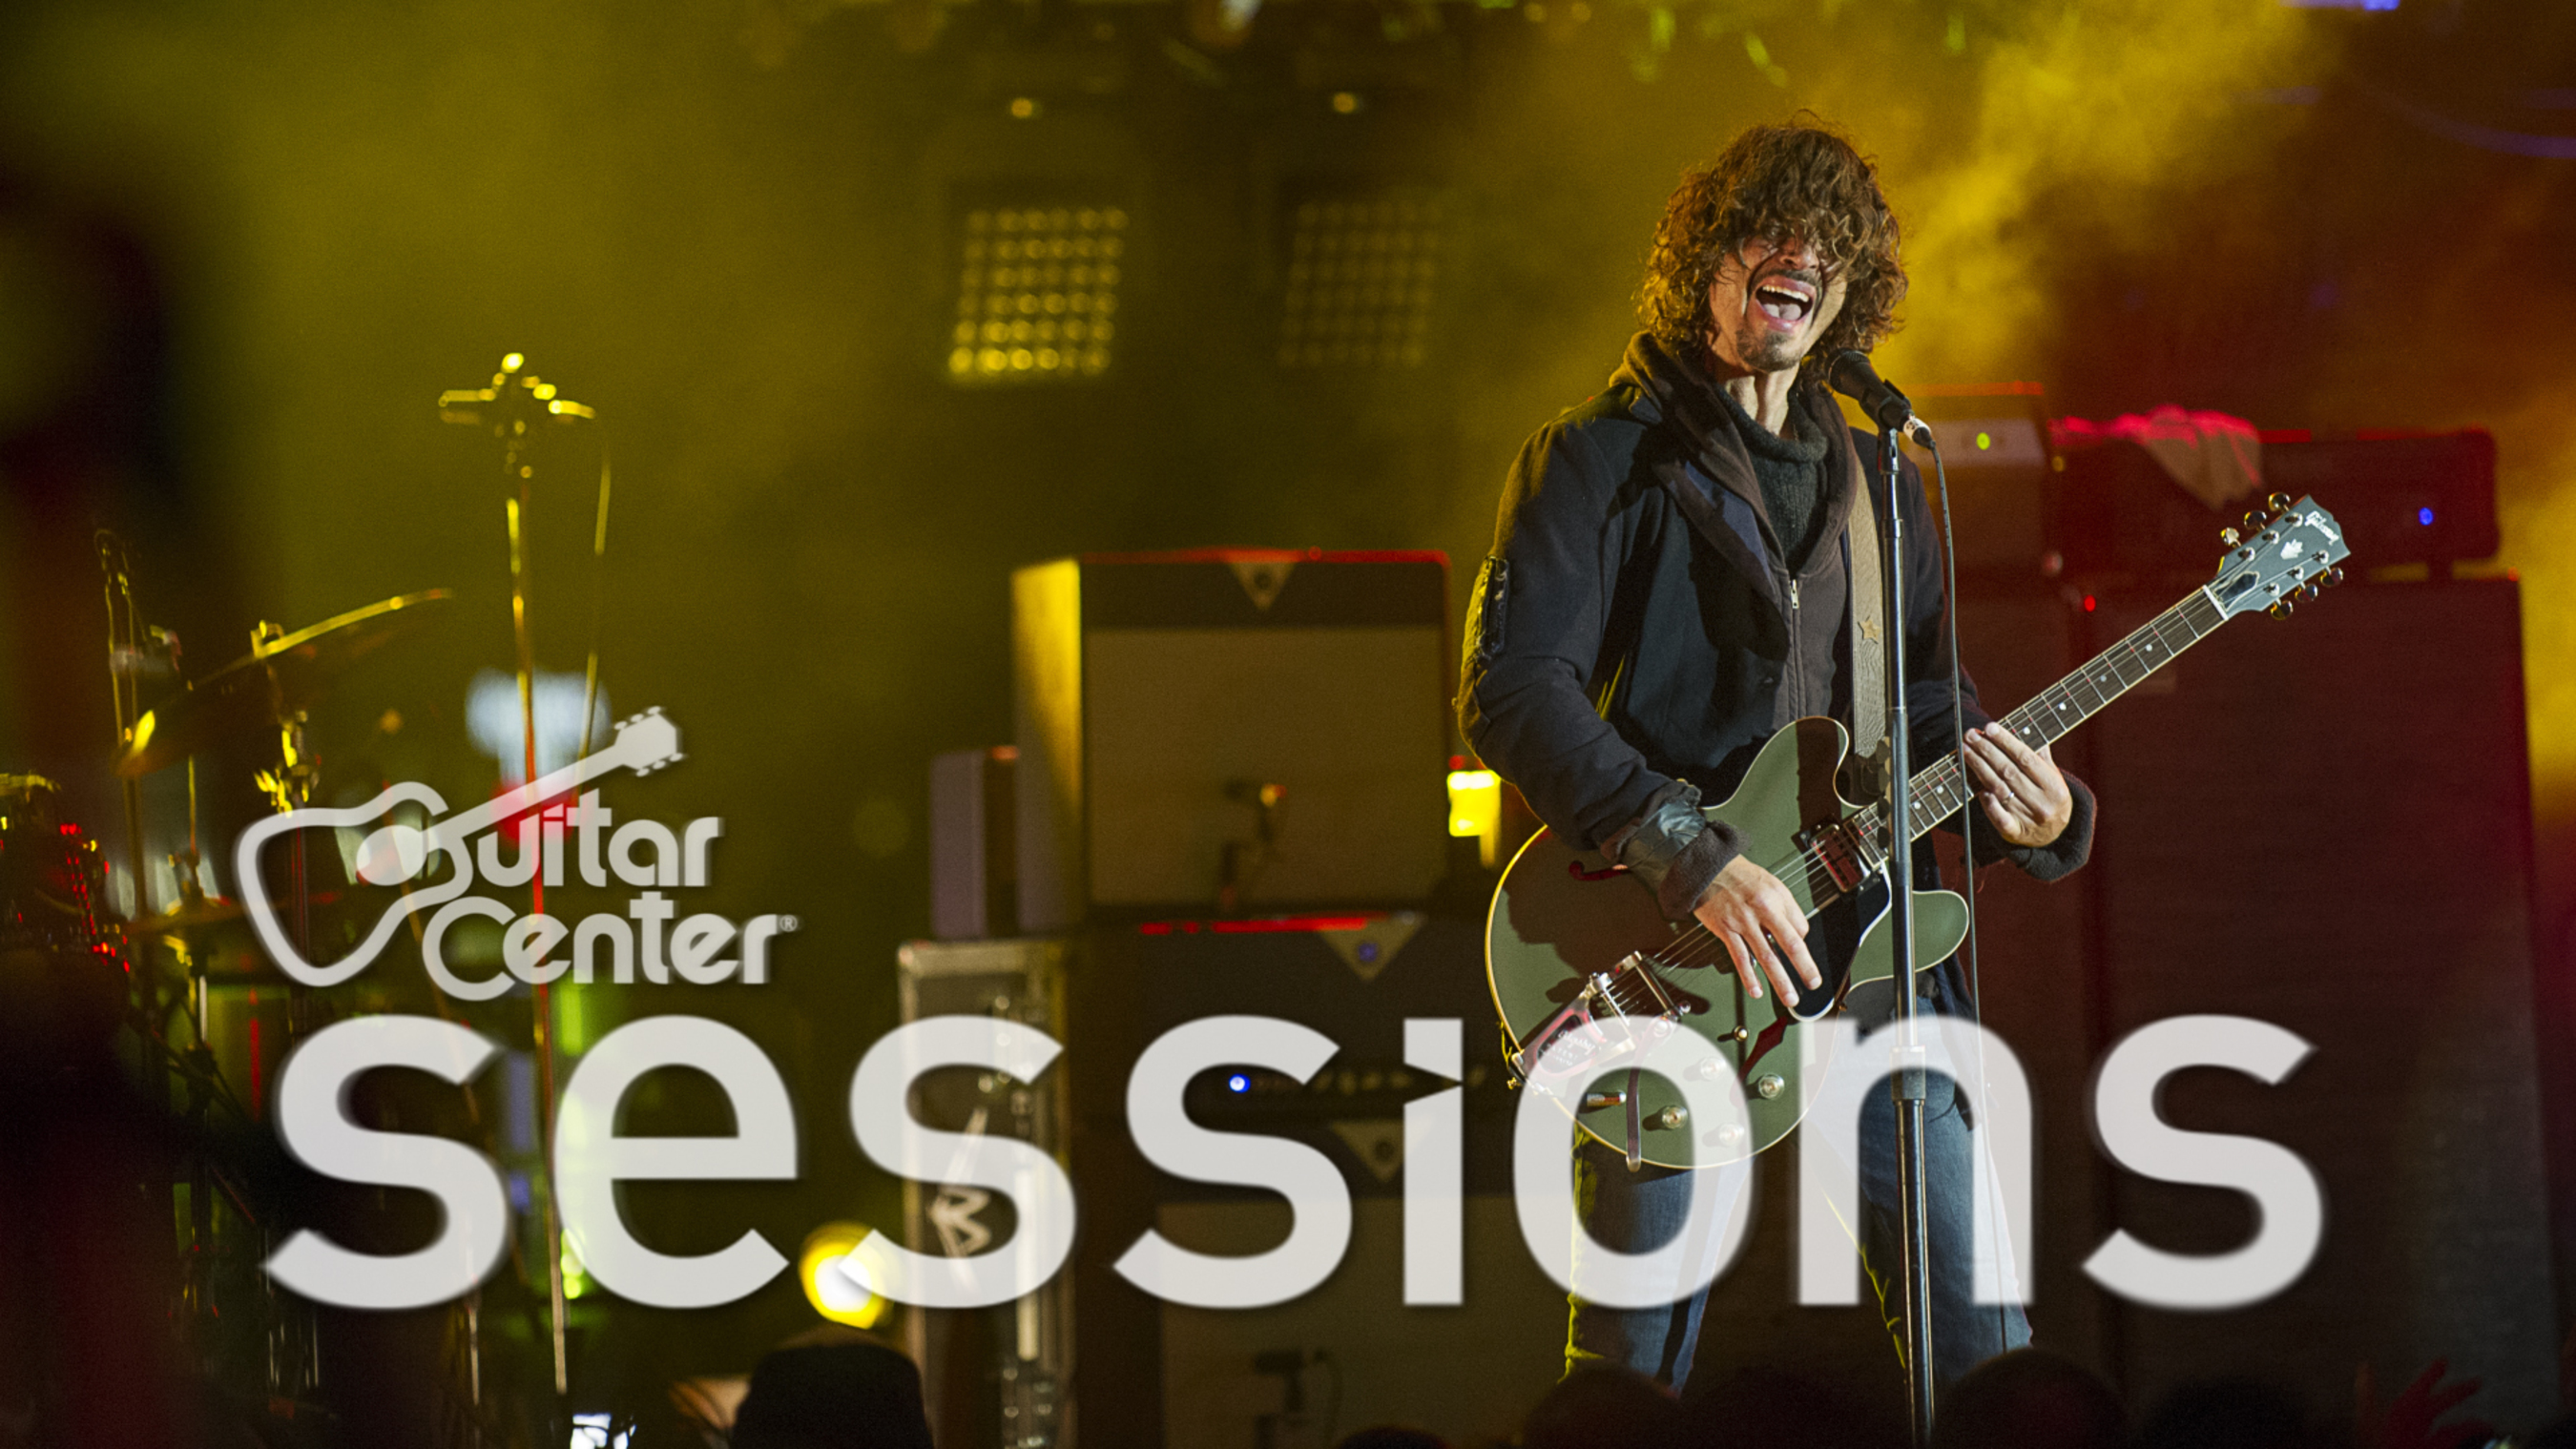 GUITAR CENTER SESSIONS SEASON 8 DEBUTS MAY 4th EXCLUSIVELY ON DIRECTV (PRNewsFoto/Guitar Center)